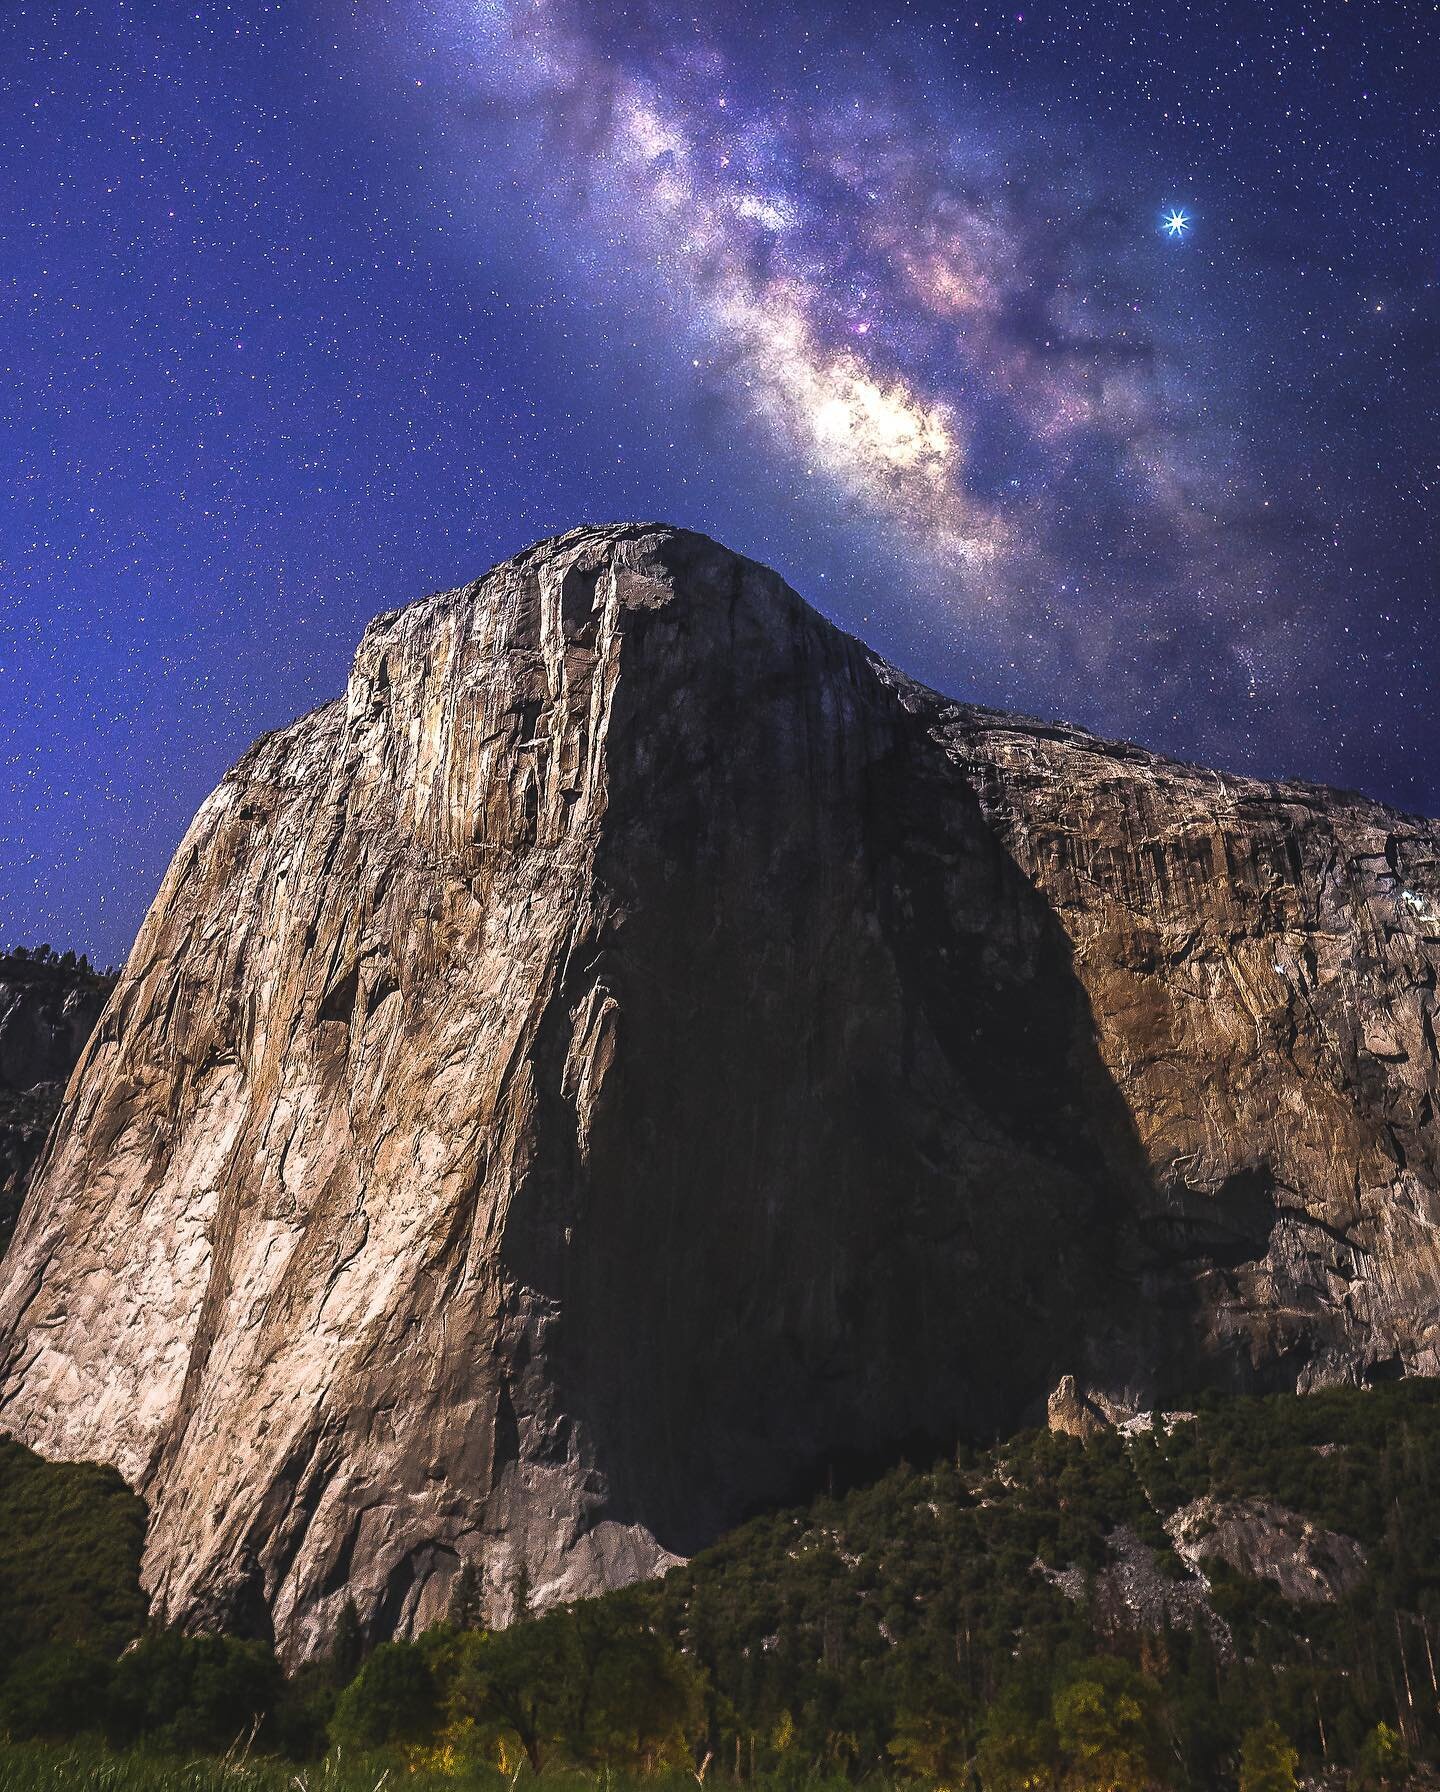 Composite shot! The light specs on the right side of the wall are actually climbers making their way up el cap. I took this photo in the meadow below during a full moon, it was indeed very cool.